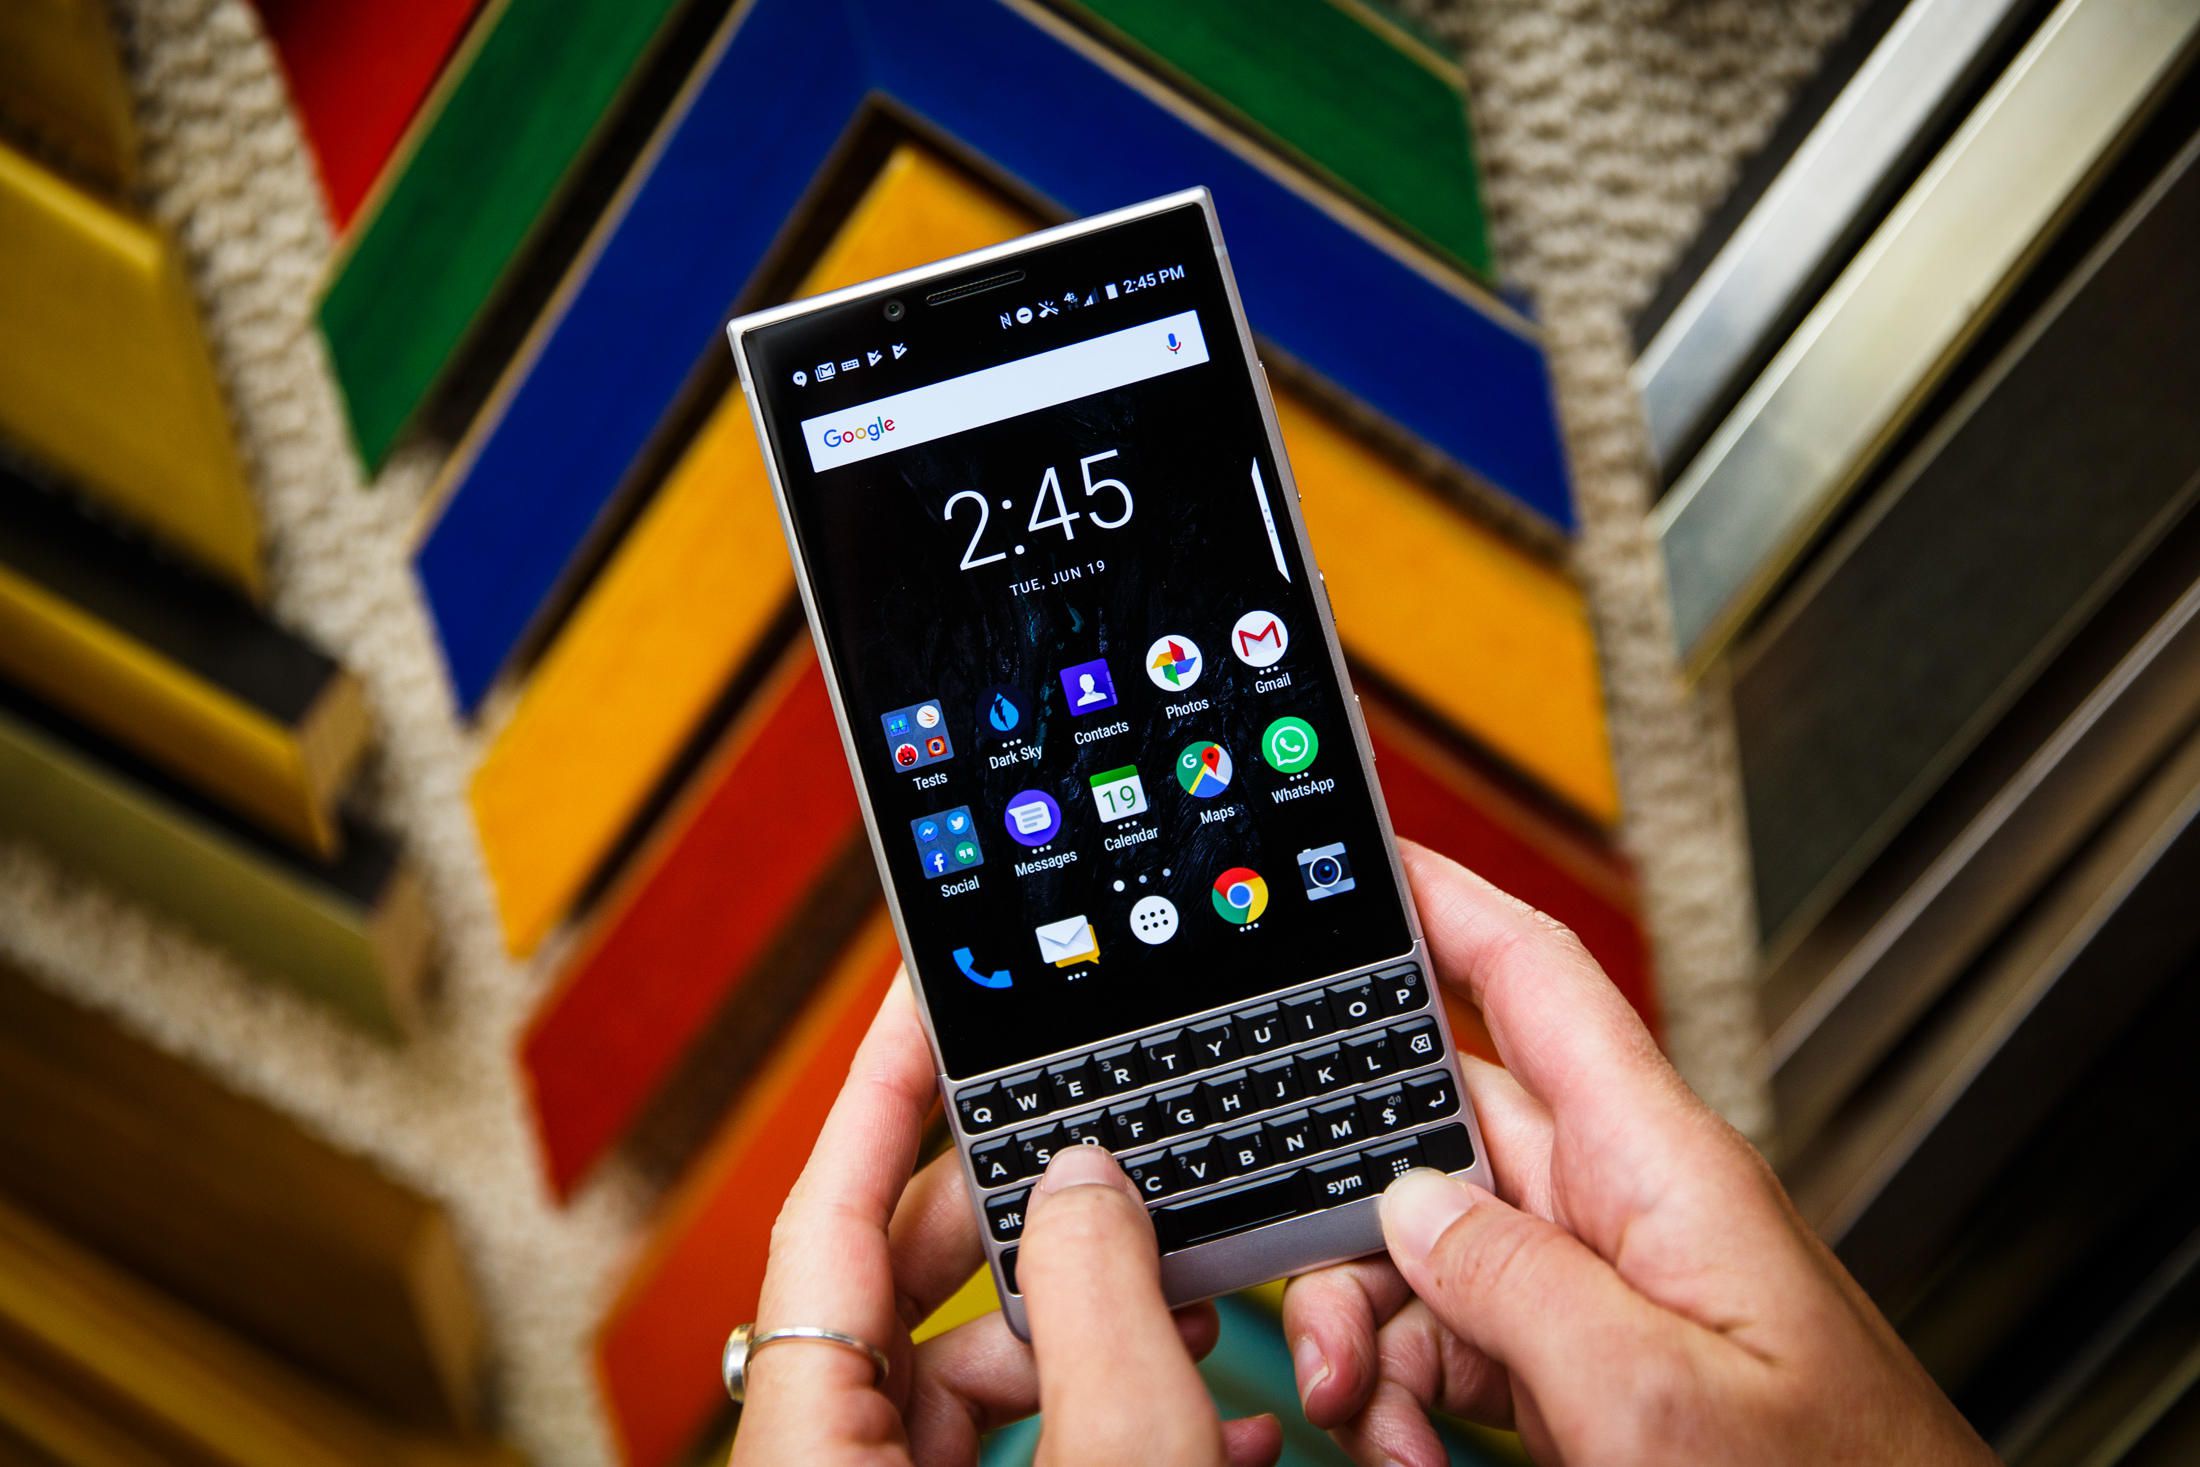 BlackBerry Key2 available for pre-order from BestBuy. Launches on July 13th